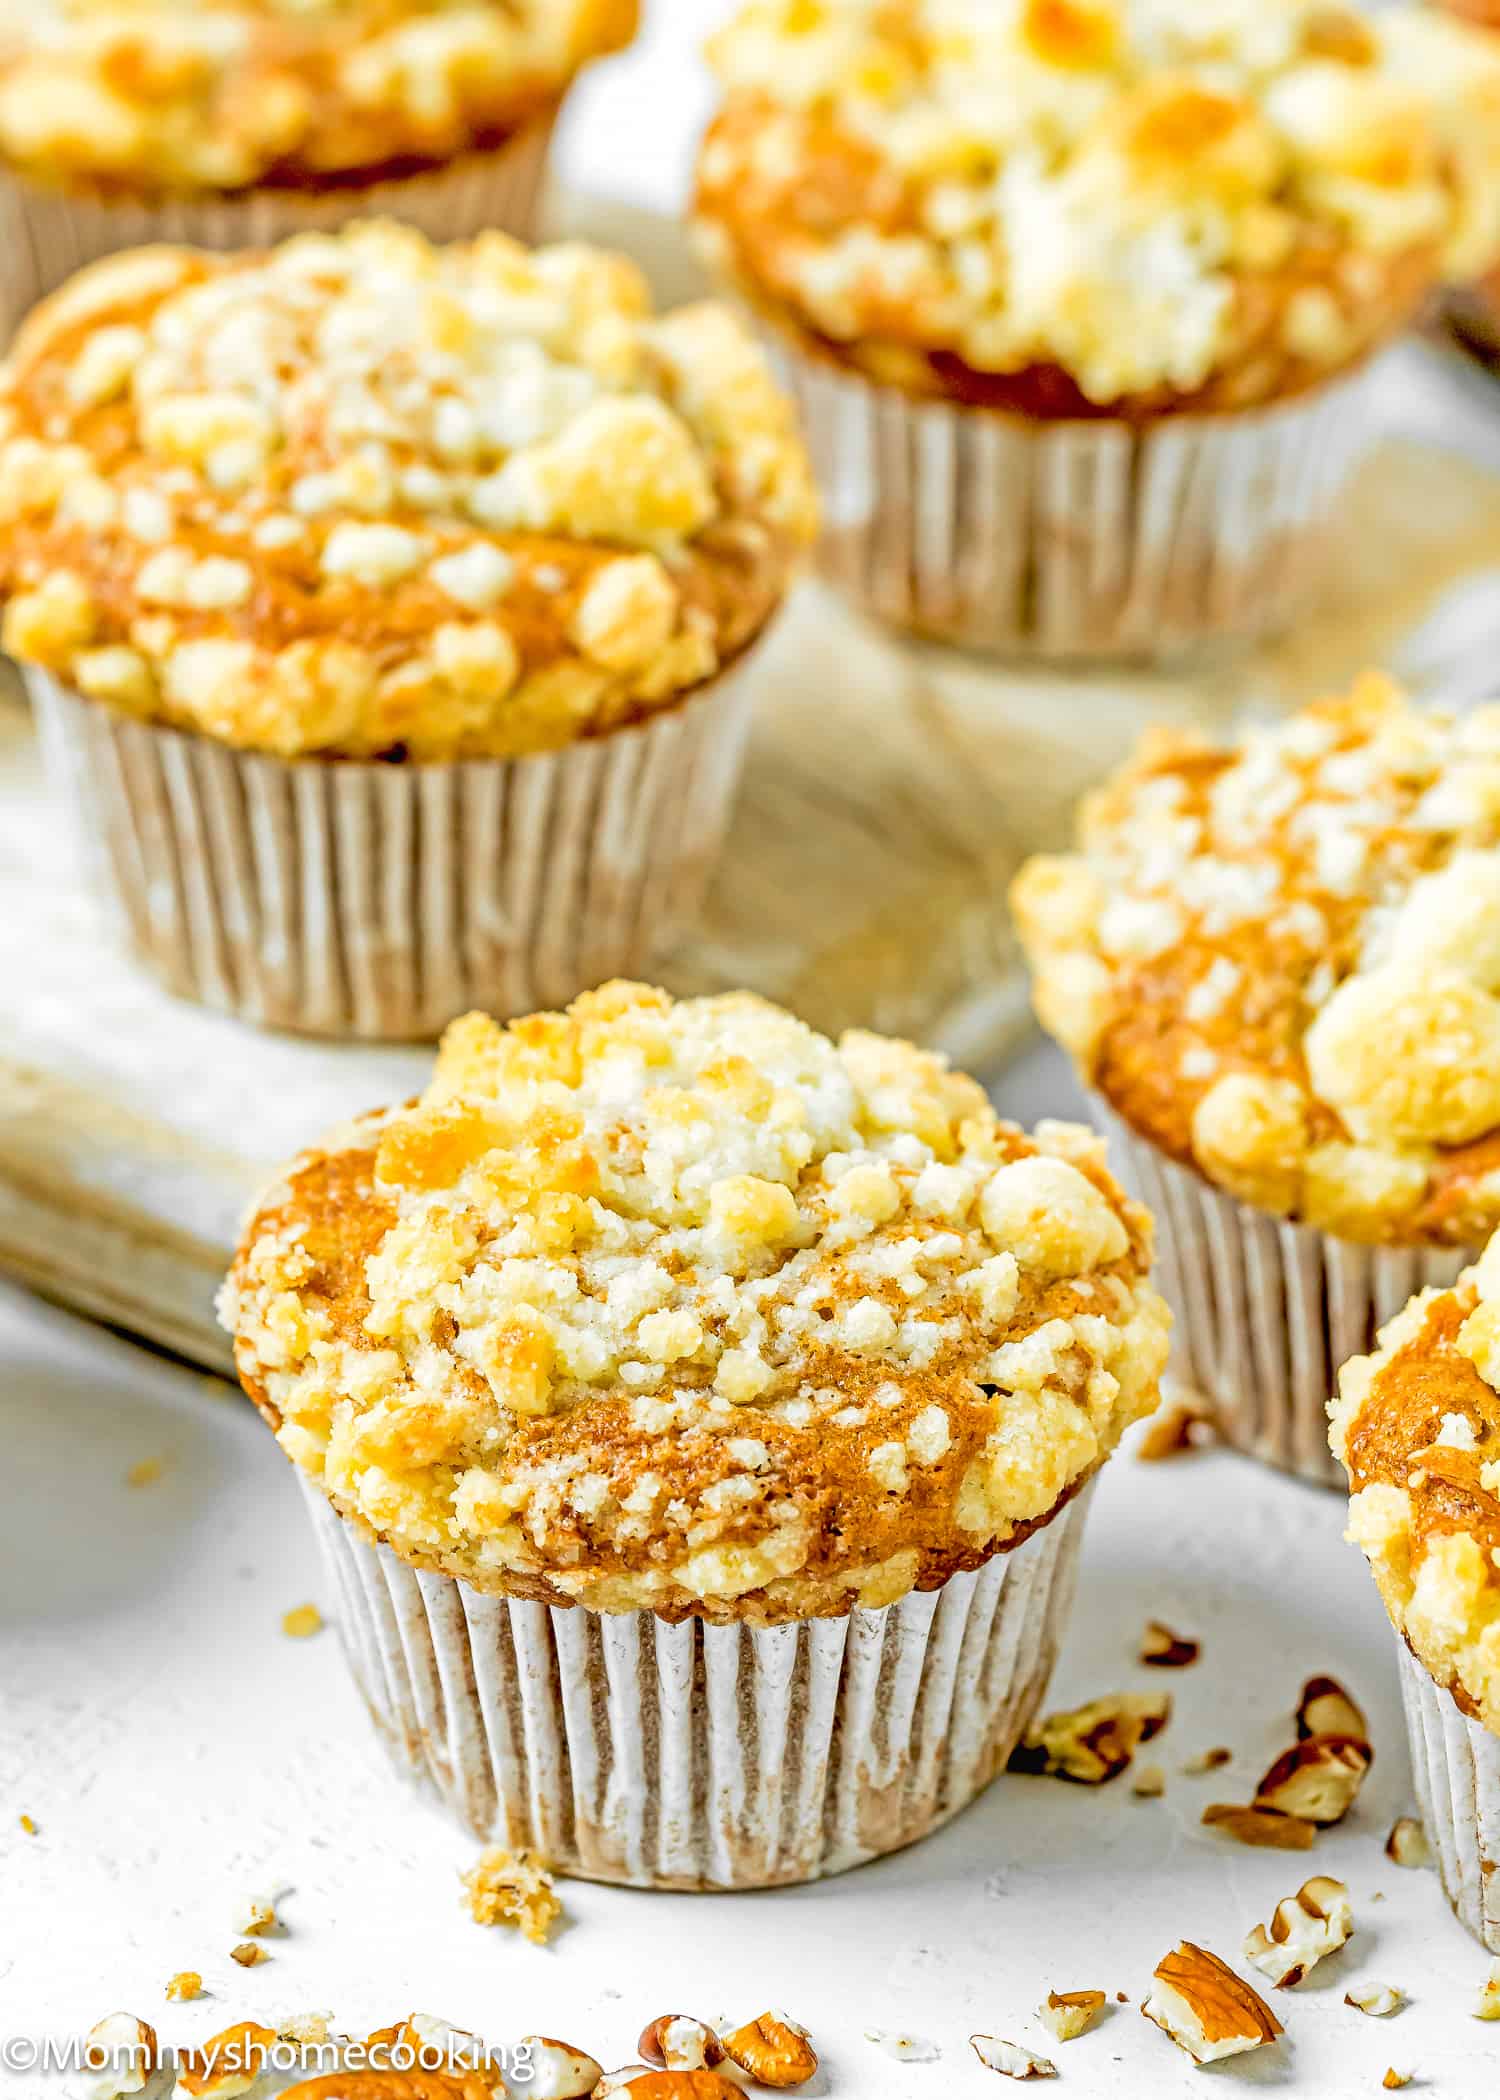 Hummingbird Muffins with crumb on top on a white surface with more muffins around.